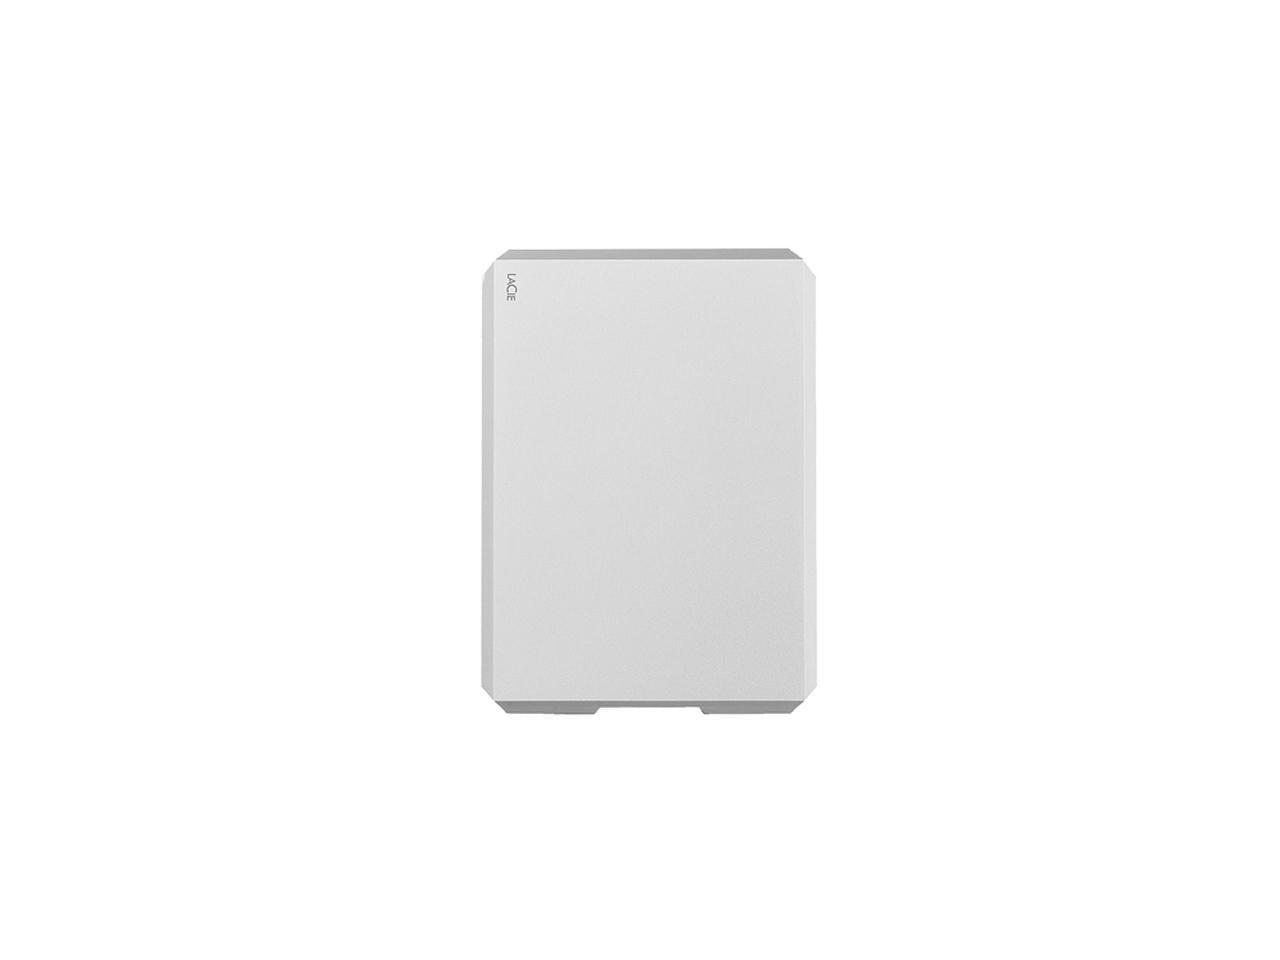 Lacie Mobile Drive 2Tb External Hard Drive Hdd - Moon Silver Usb-C Usb 3.0, For Mac And Pc Computer Desktop Workstation Laptop (Sthg2000400)